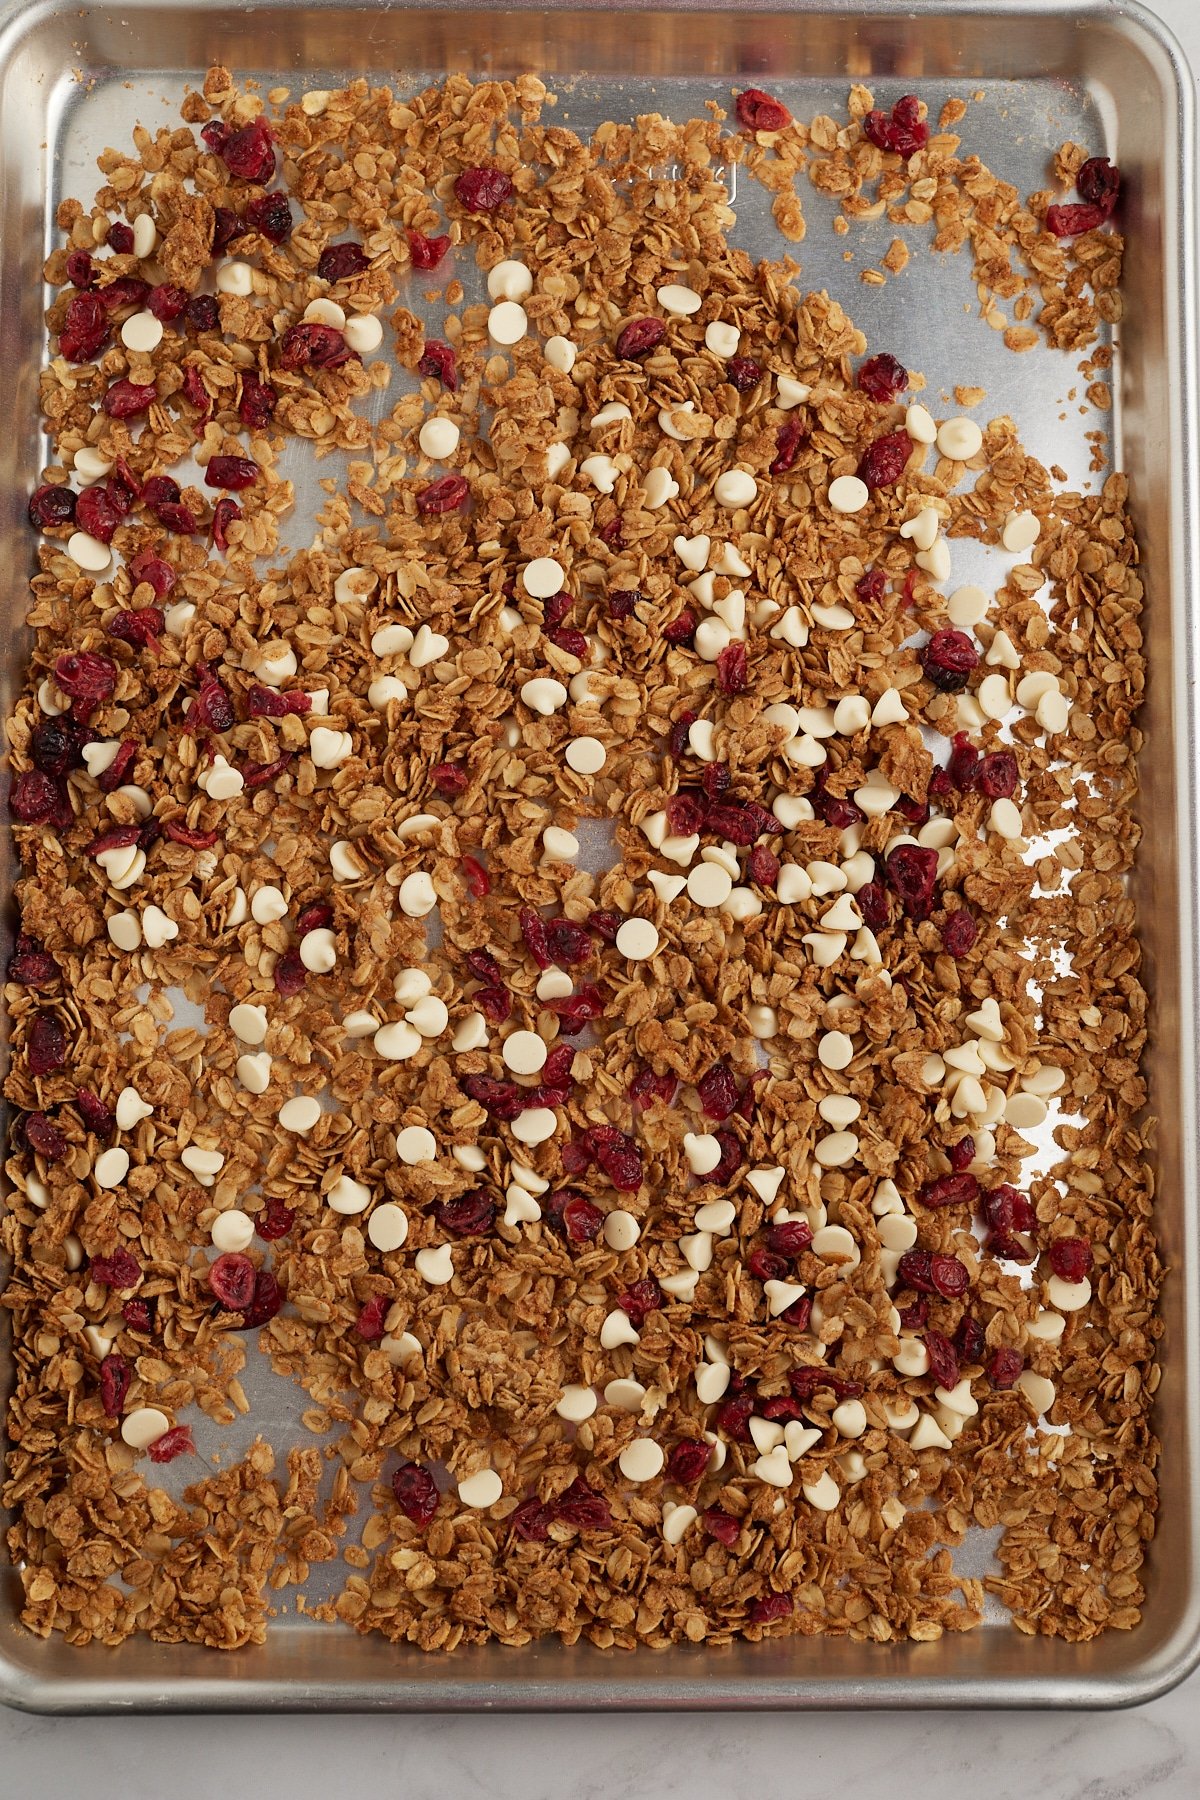 White chocolate and cranberries mixed into the cooked granola.